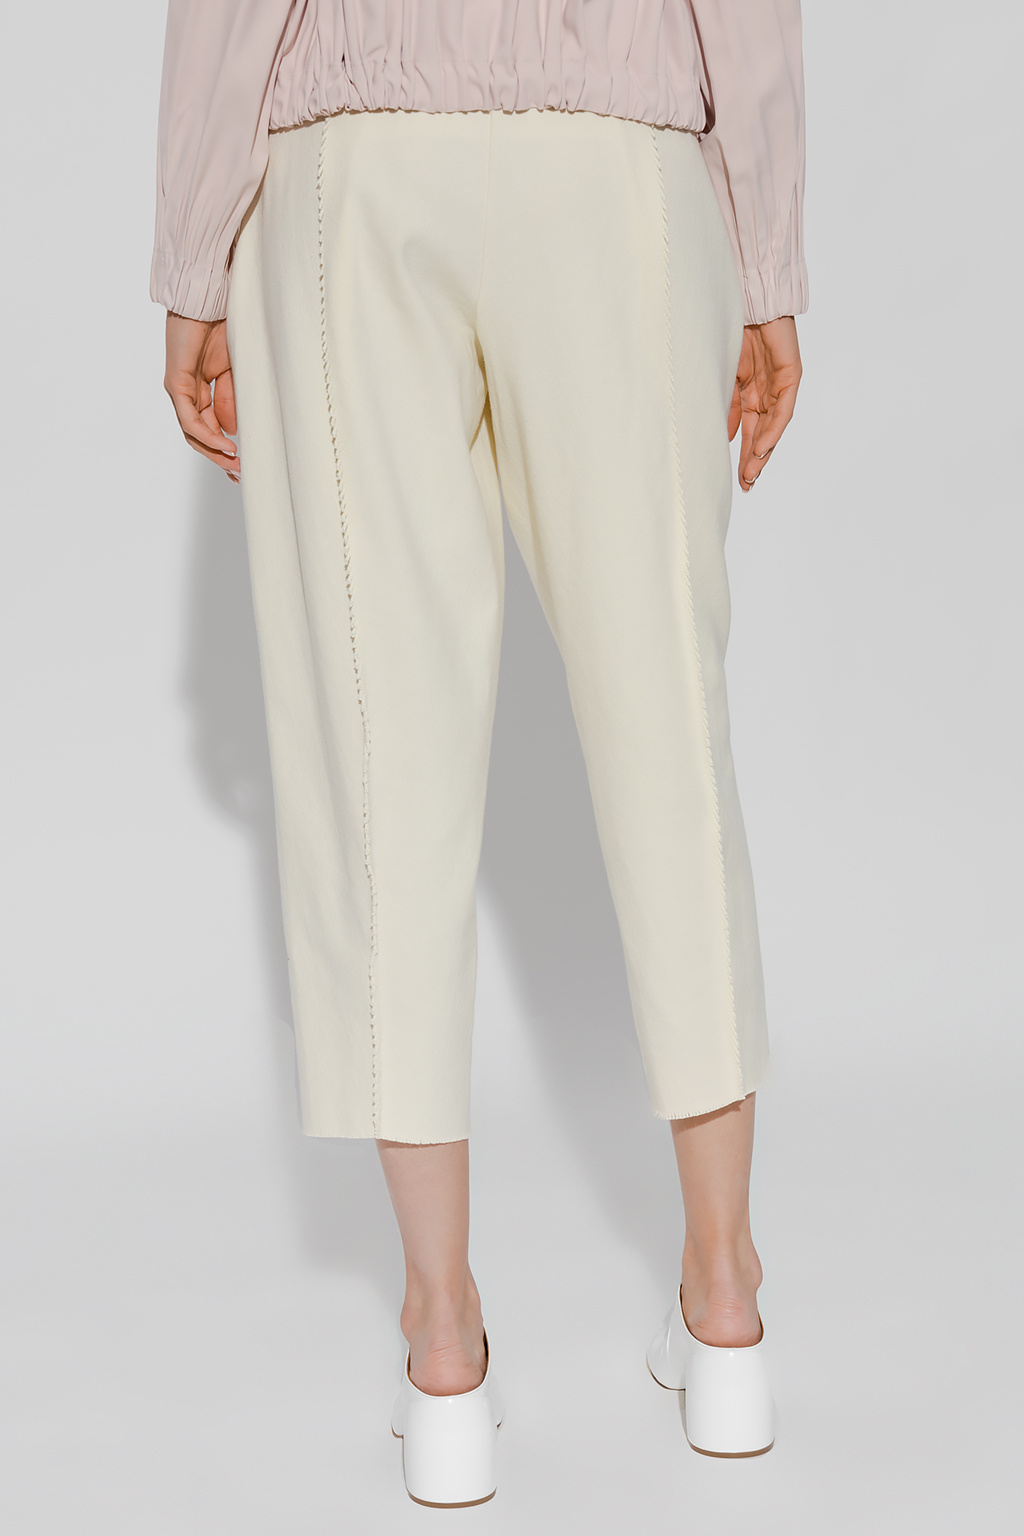 Issey Miyake 1-shorts trousers with stitching details